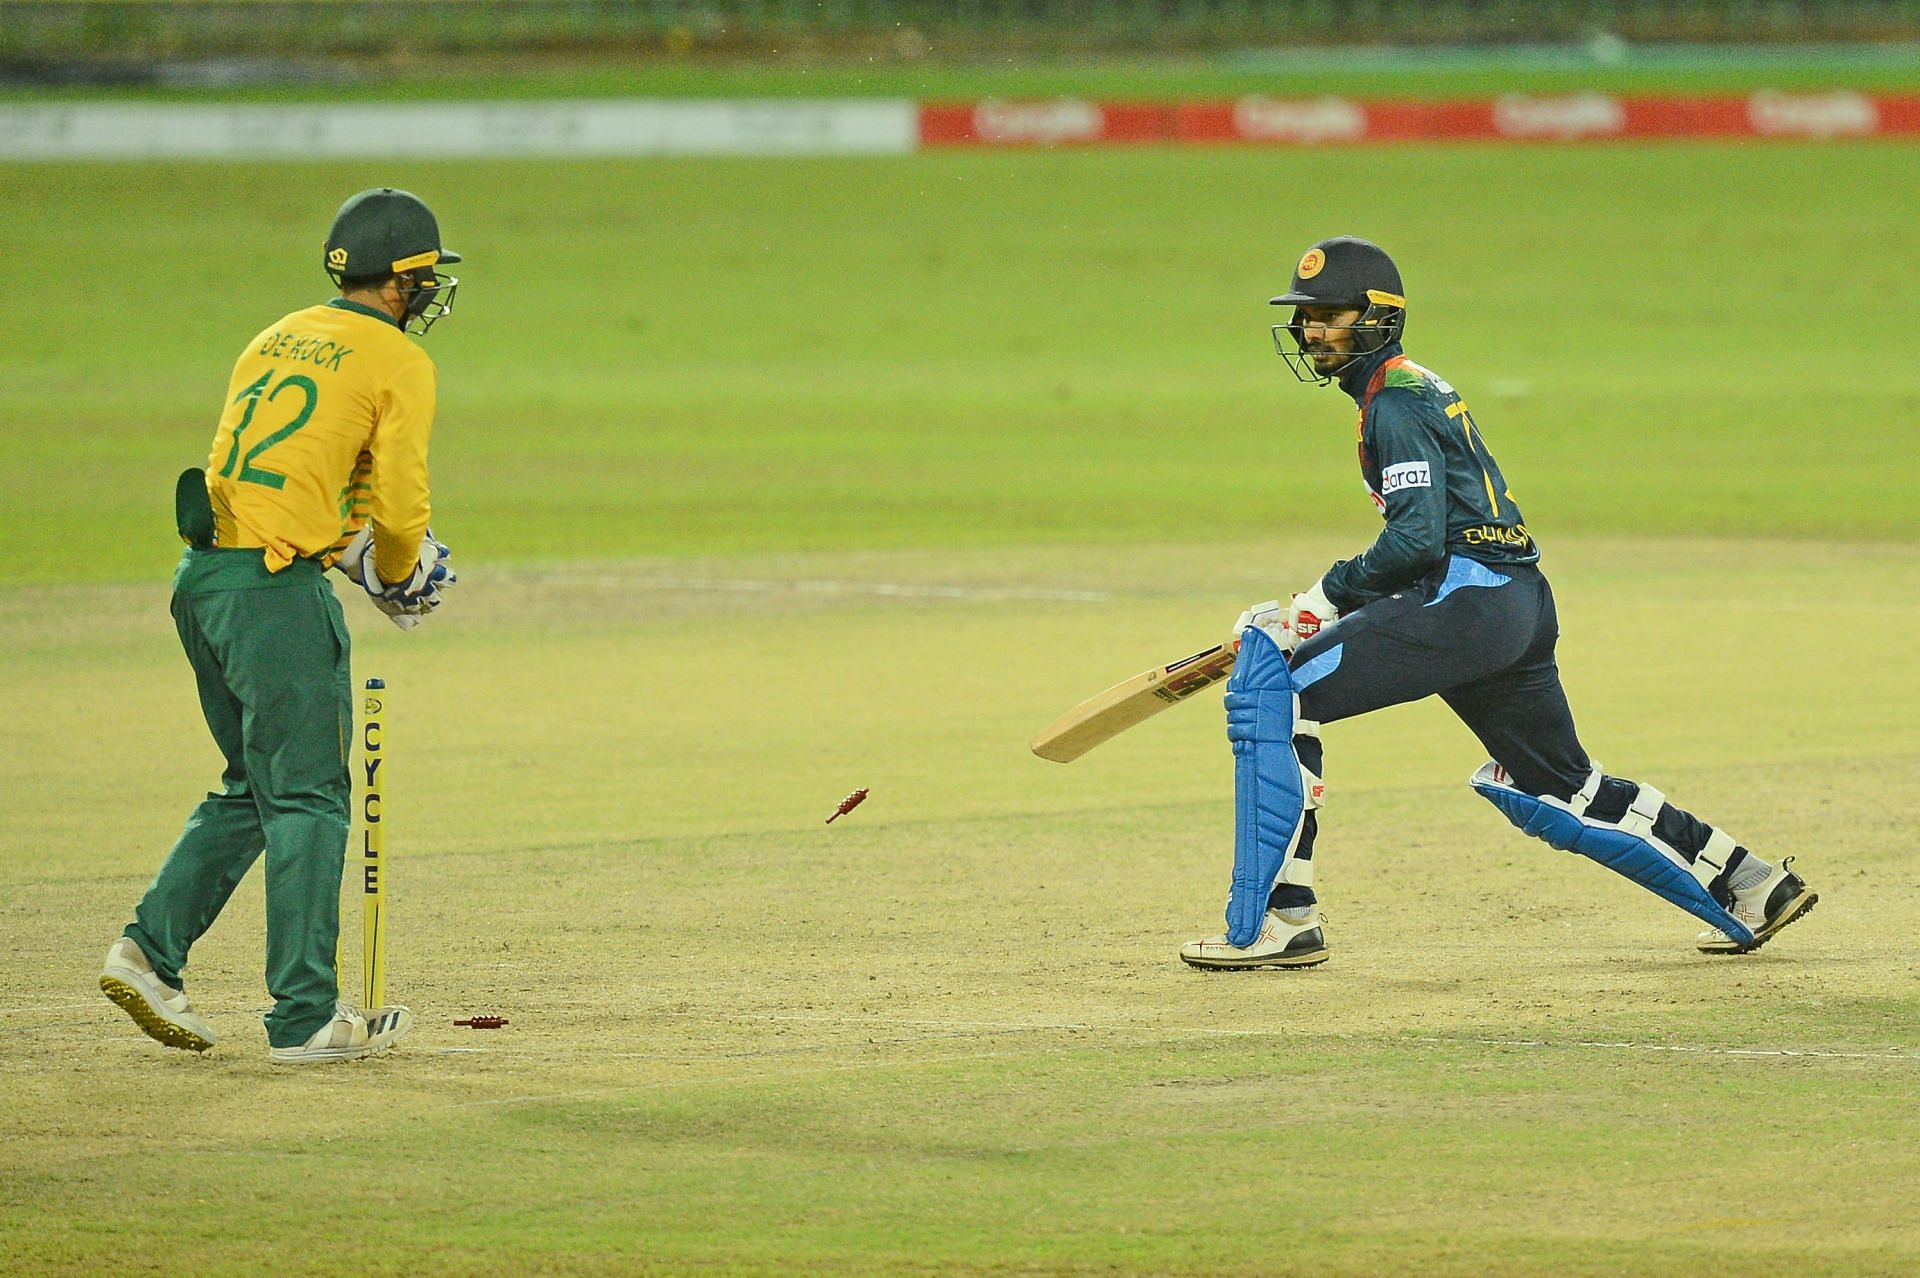 The Proteas have dominated the South Africa vs Sri Lanka rivalry in the T20I format